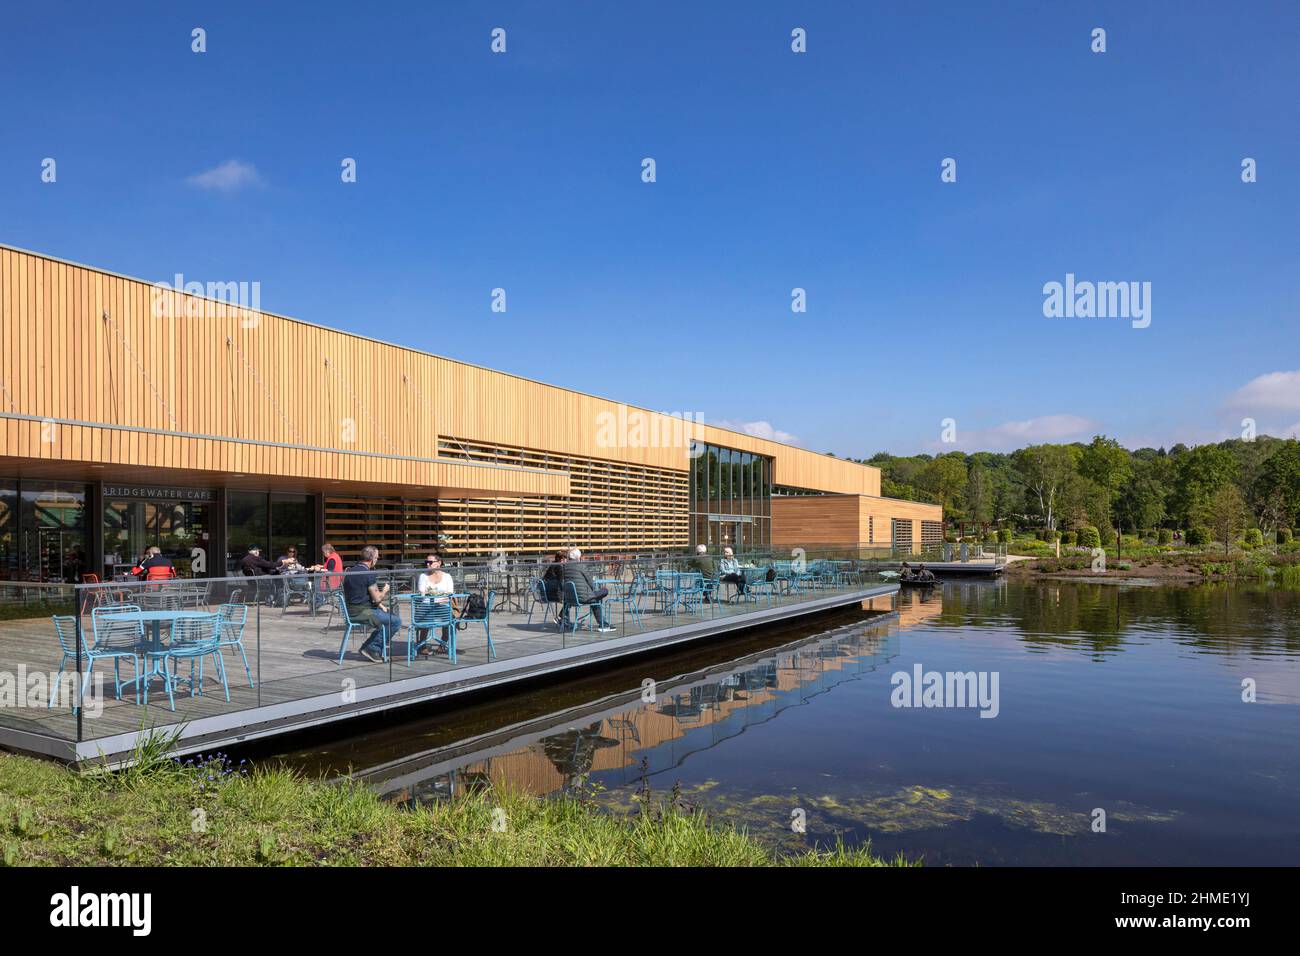 Outdoor café area seating platform from the southeast. Royal Horticultural Society Visitor Centre, Worsley, Salford, United Kingdom. Architect: Hodder Stock Photo